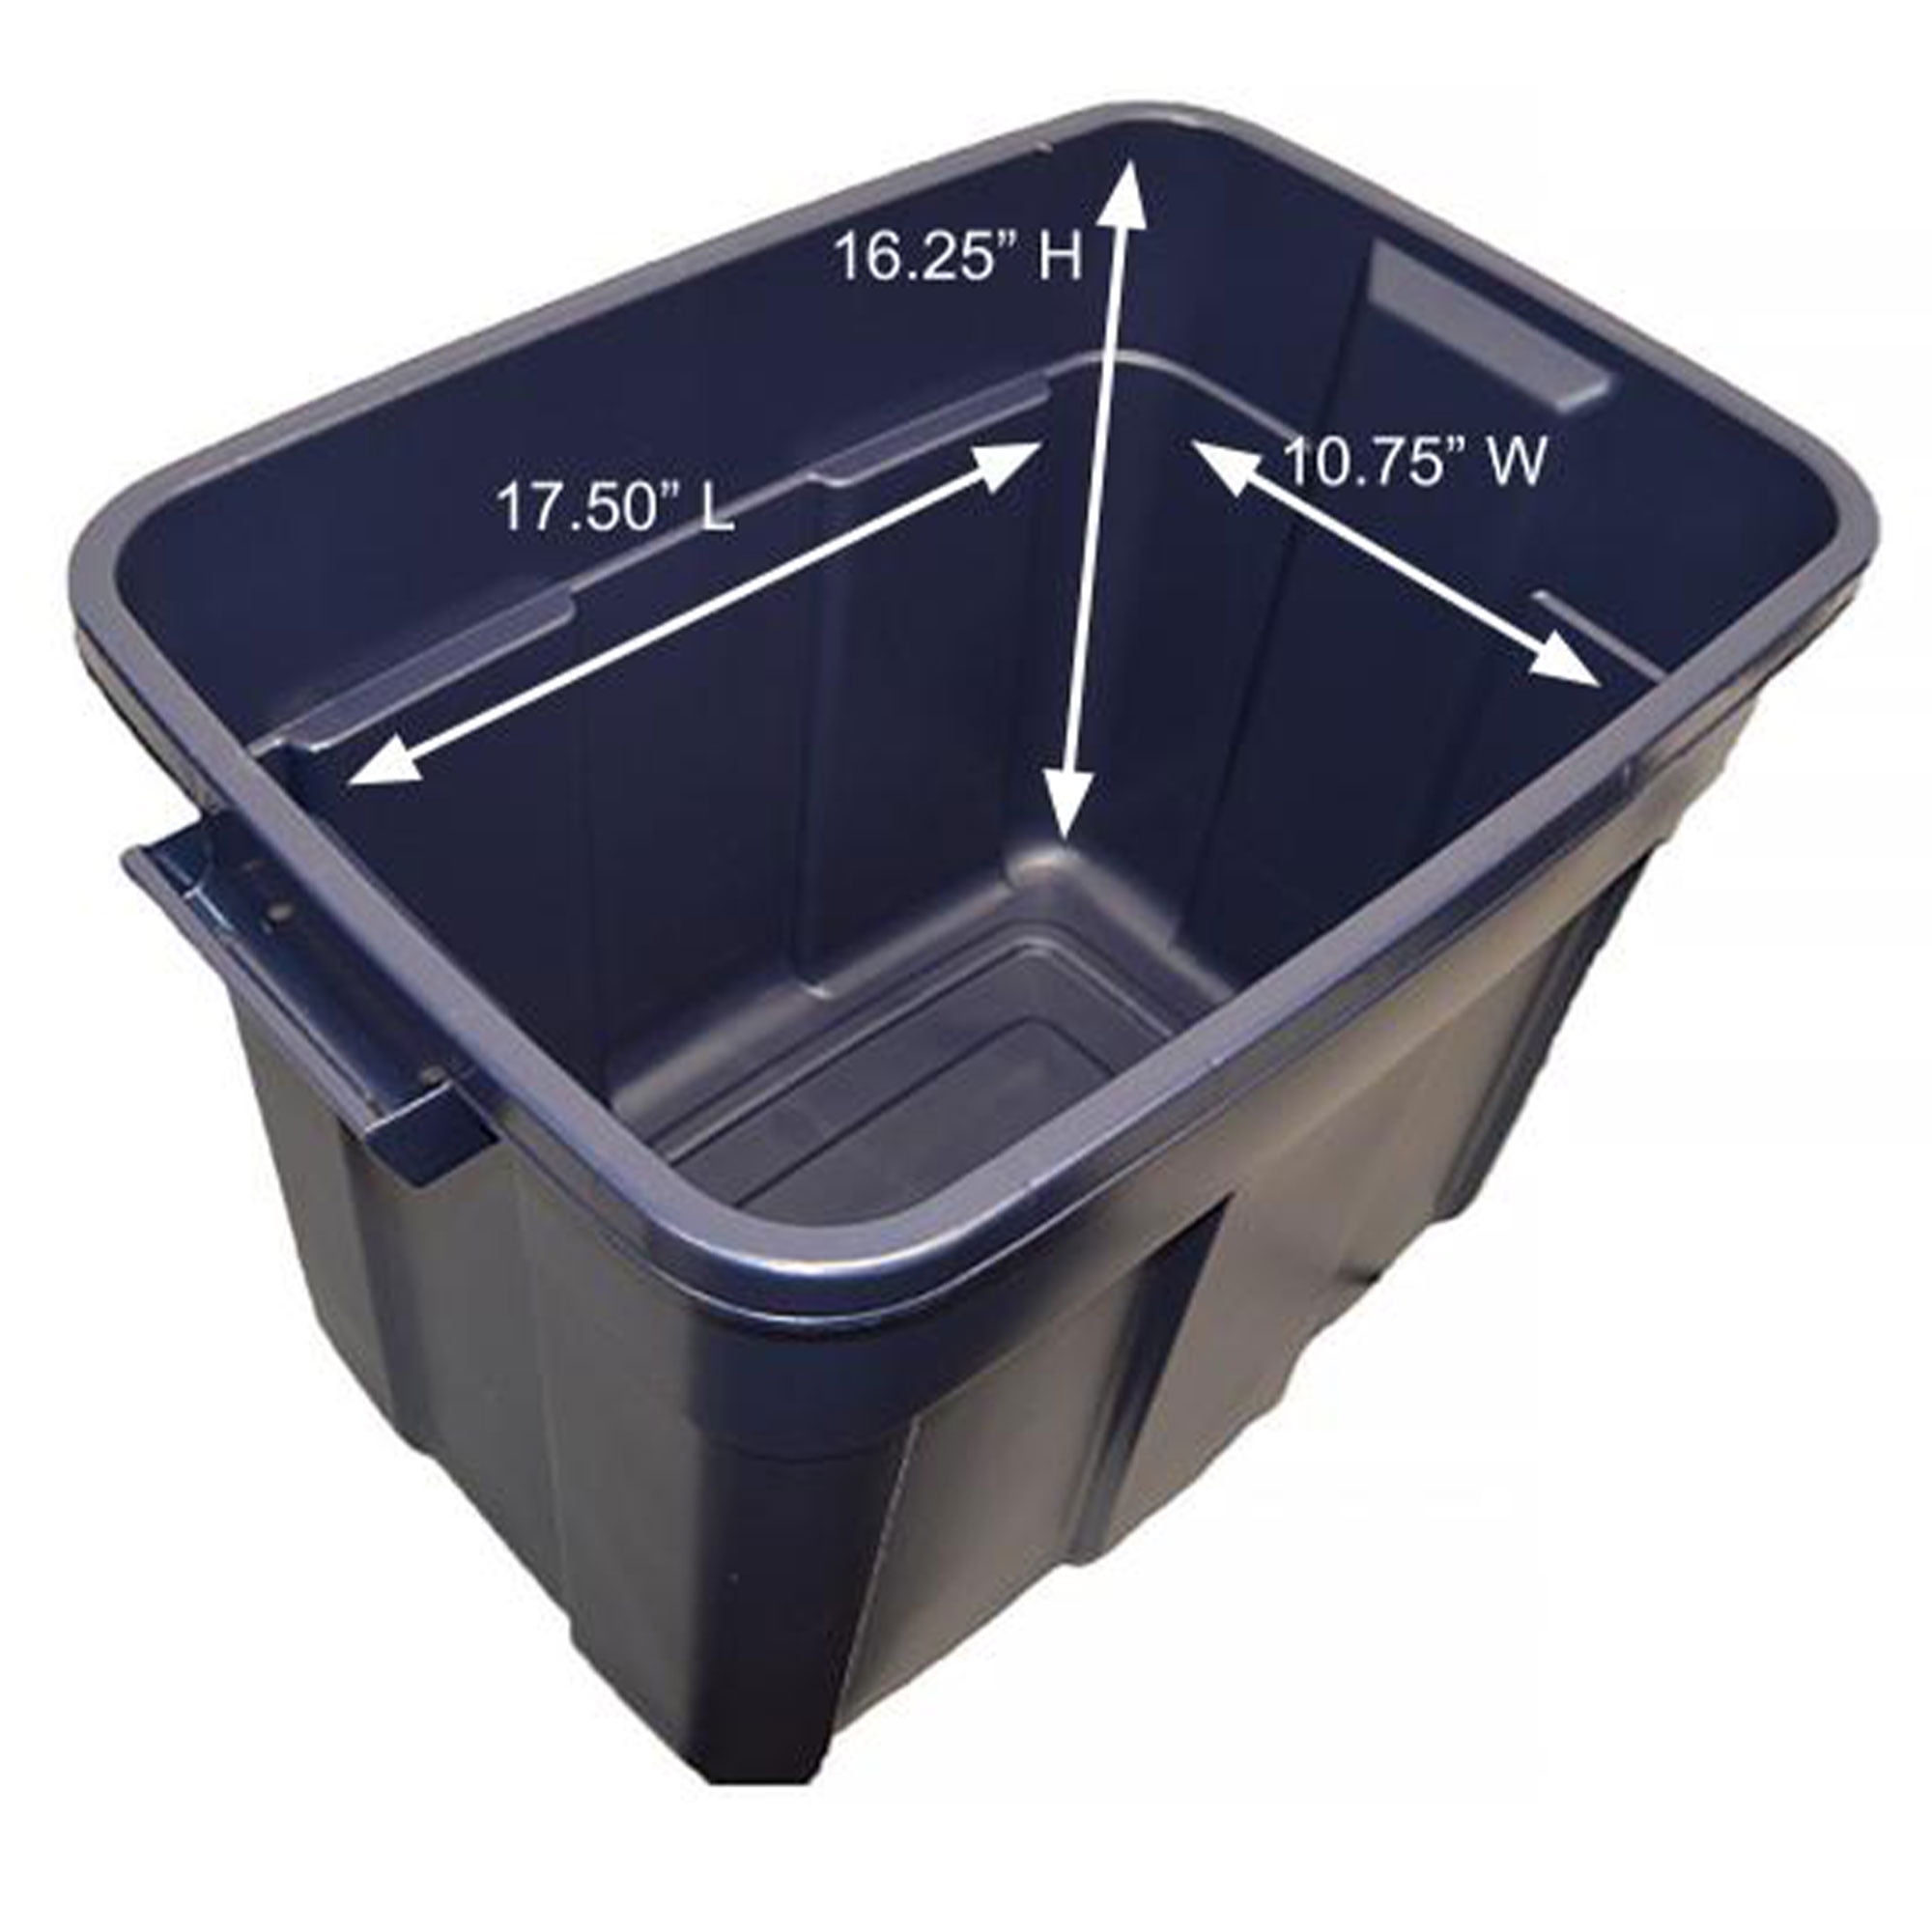 Rubbermaid Roughneck 18 Gal. Rugged Stackable Storage Tote Container  (6-Pack) RMRT180051-6pack - The Home Depot